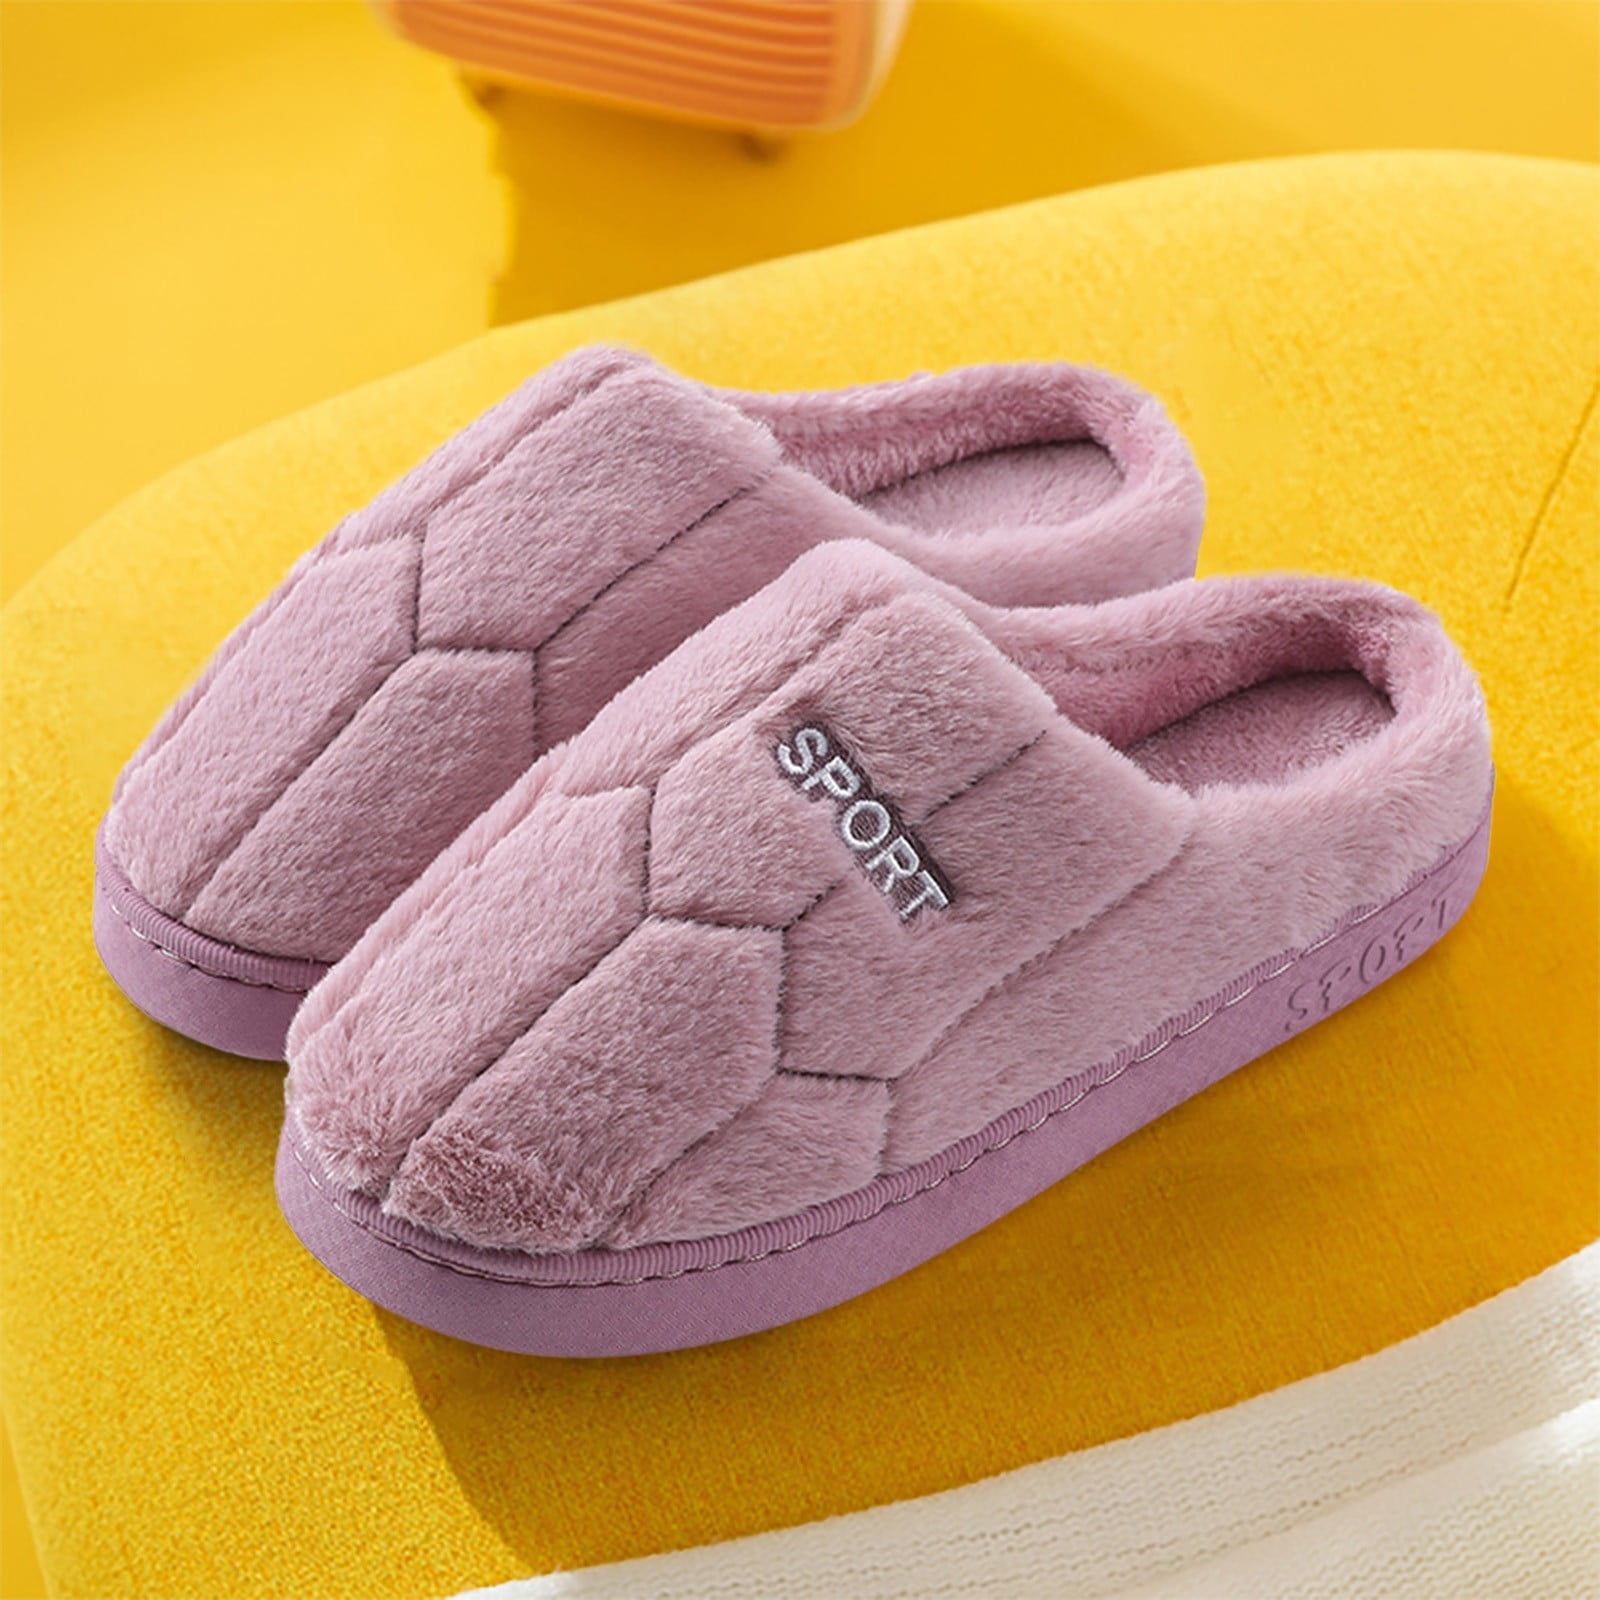 FREE SAMPLE Acupressure Slippers Sandals Shoes| Alibaba.com